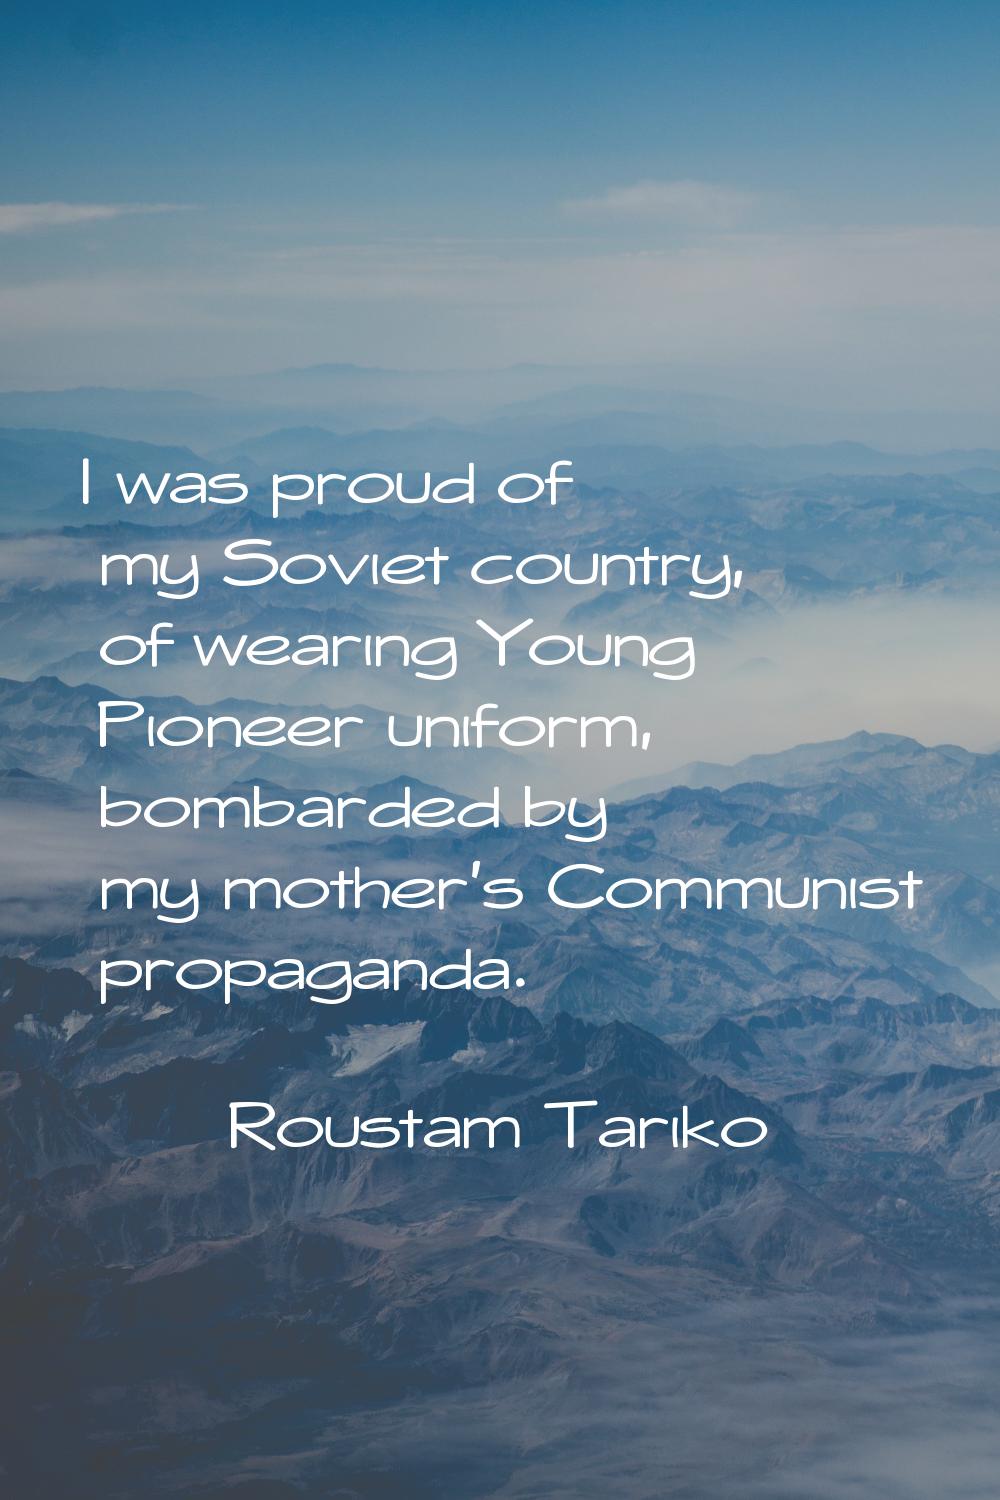 I was proud of my Soviet country, of wearing Young Pioneer uniform, bombarded by my mother's Commun